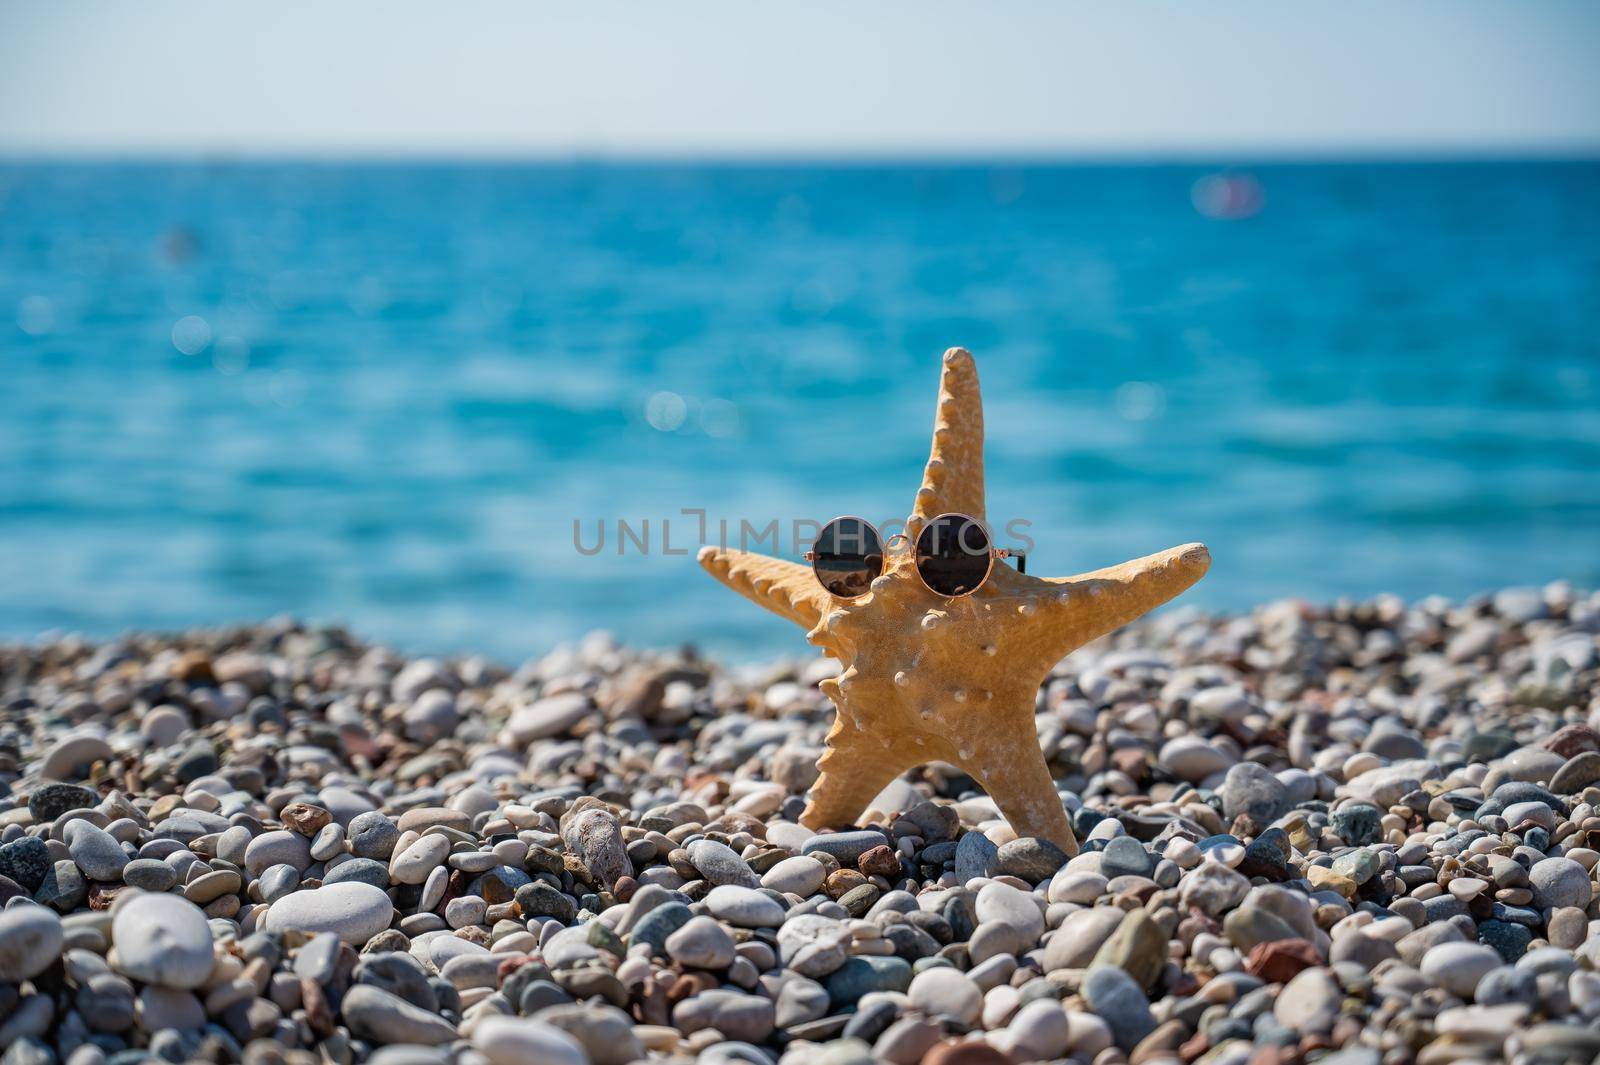 Starfish in sunglasses on a pebble beach by the sea. by mrwed54